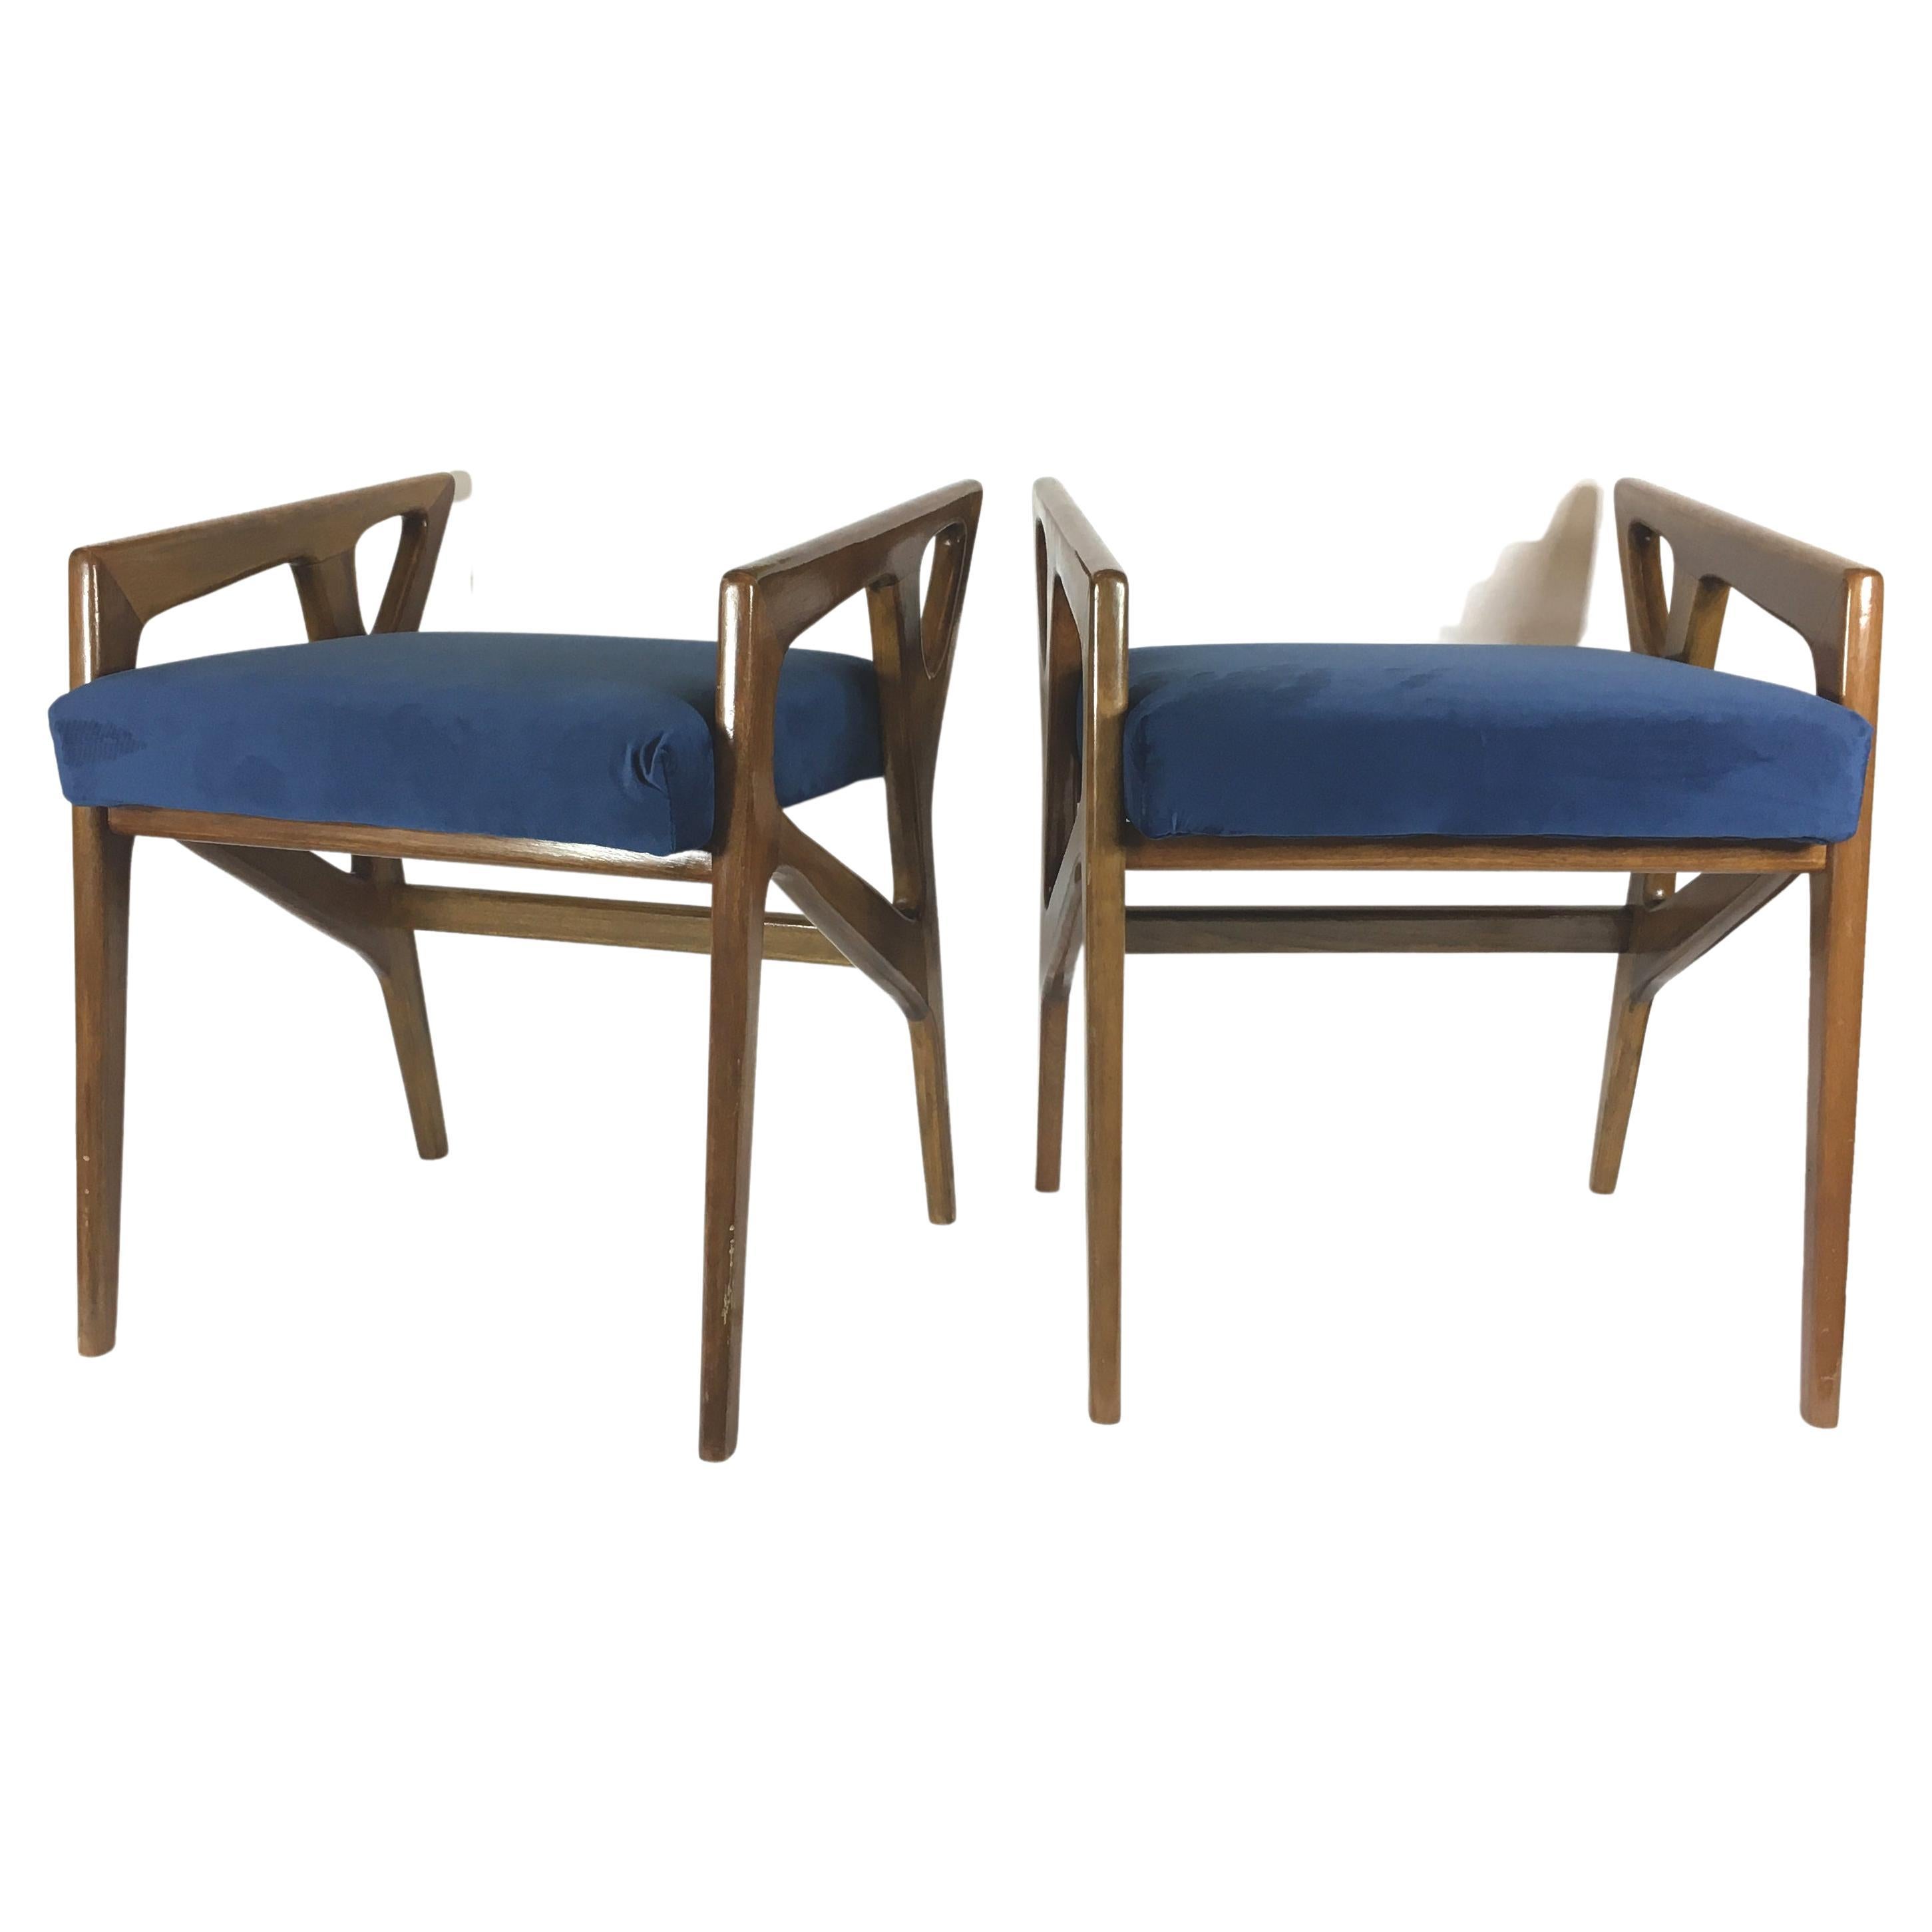 Pair of Stools Mod. “687”, Design Gio Ponti, Cassina Production, Italy, 1950s For Sale